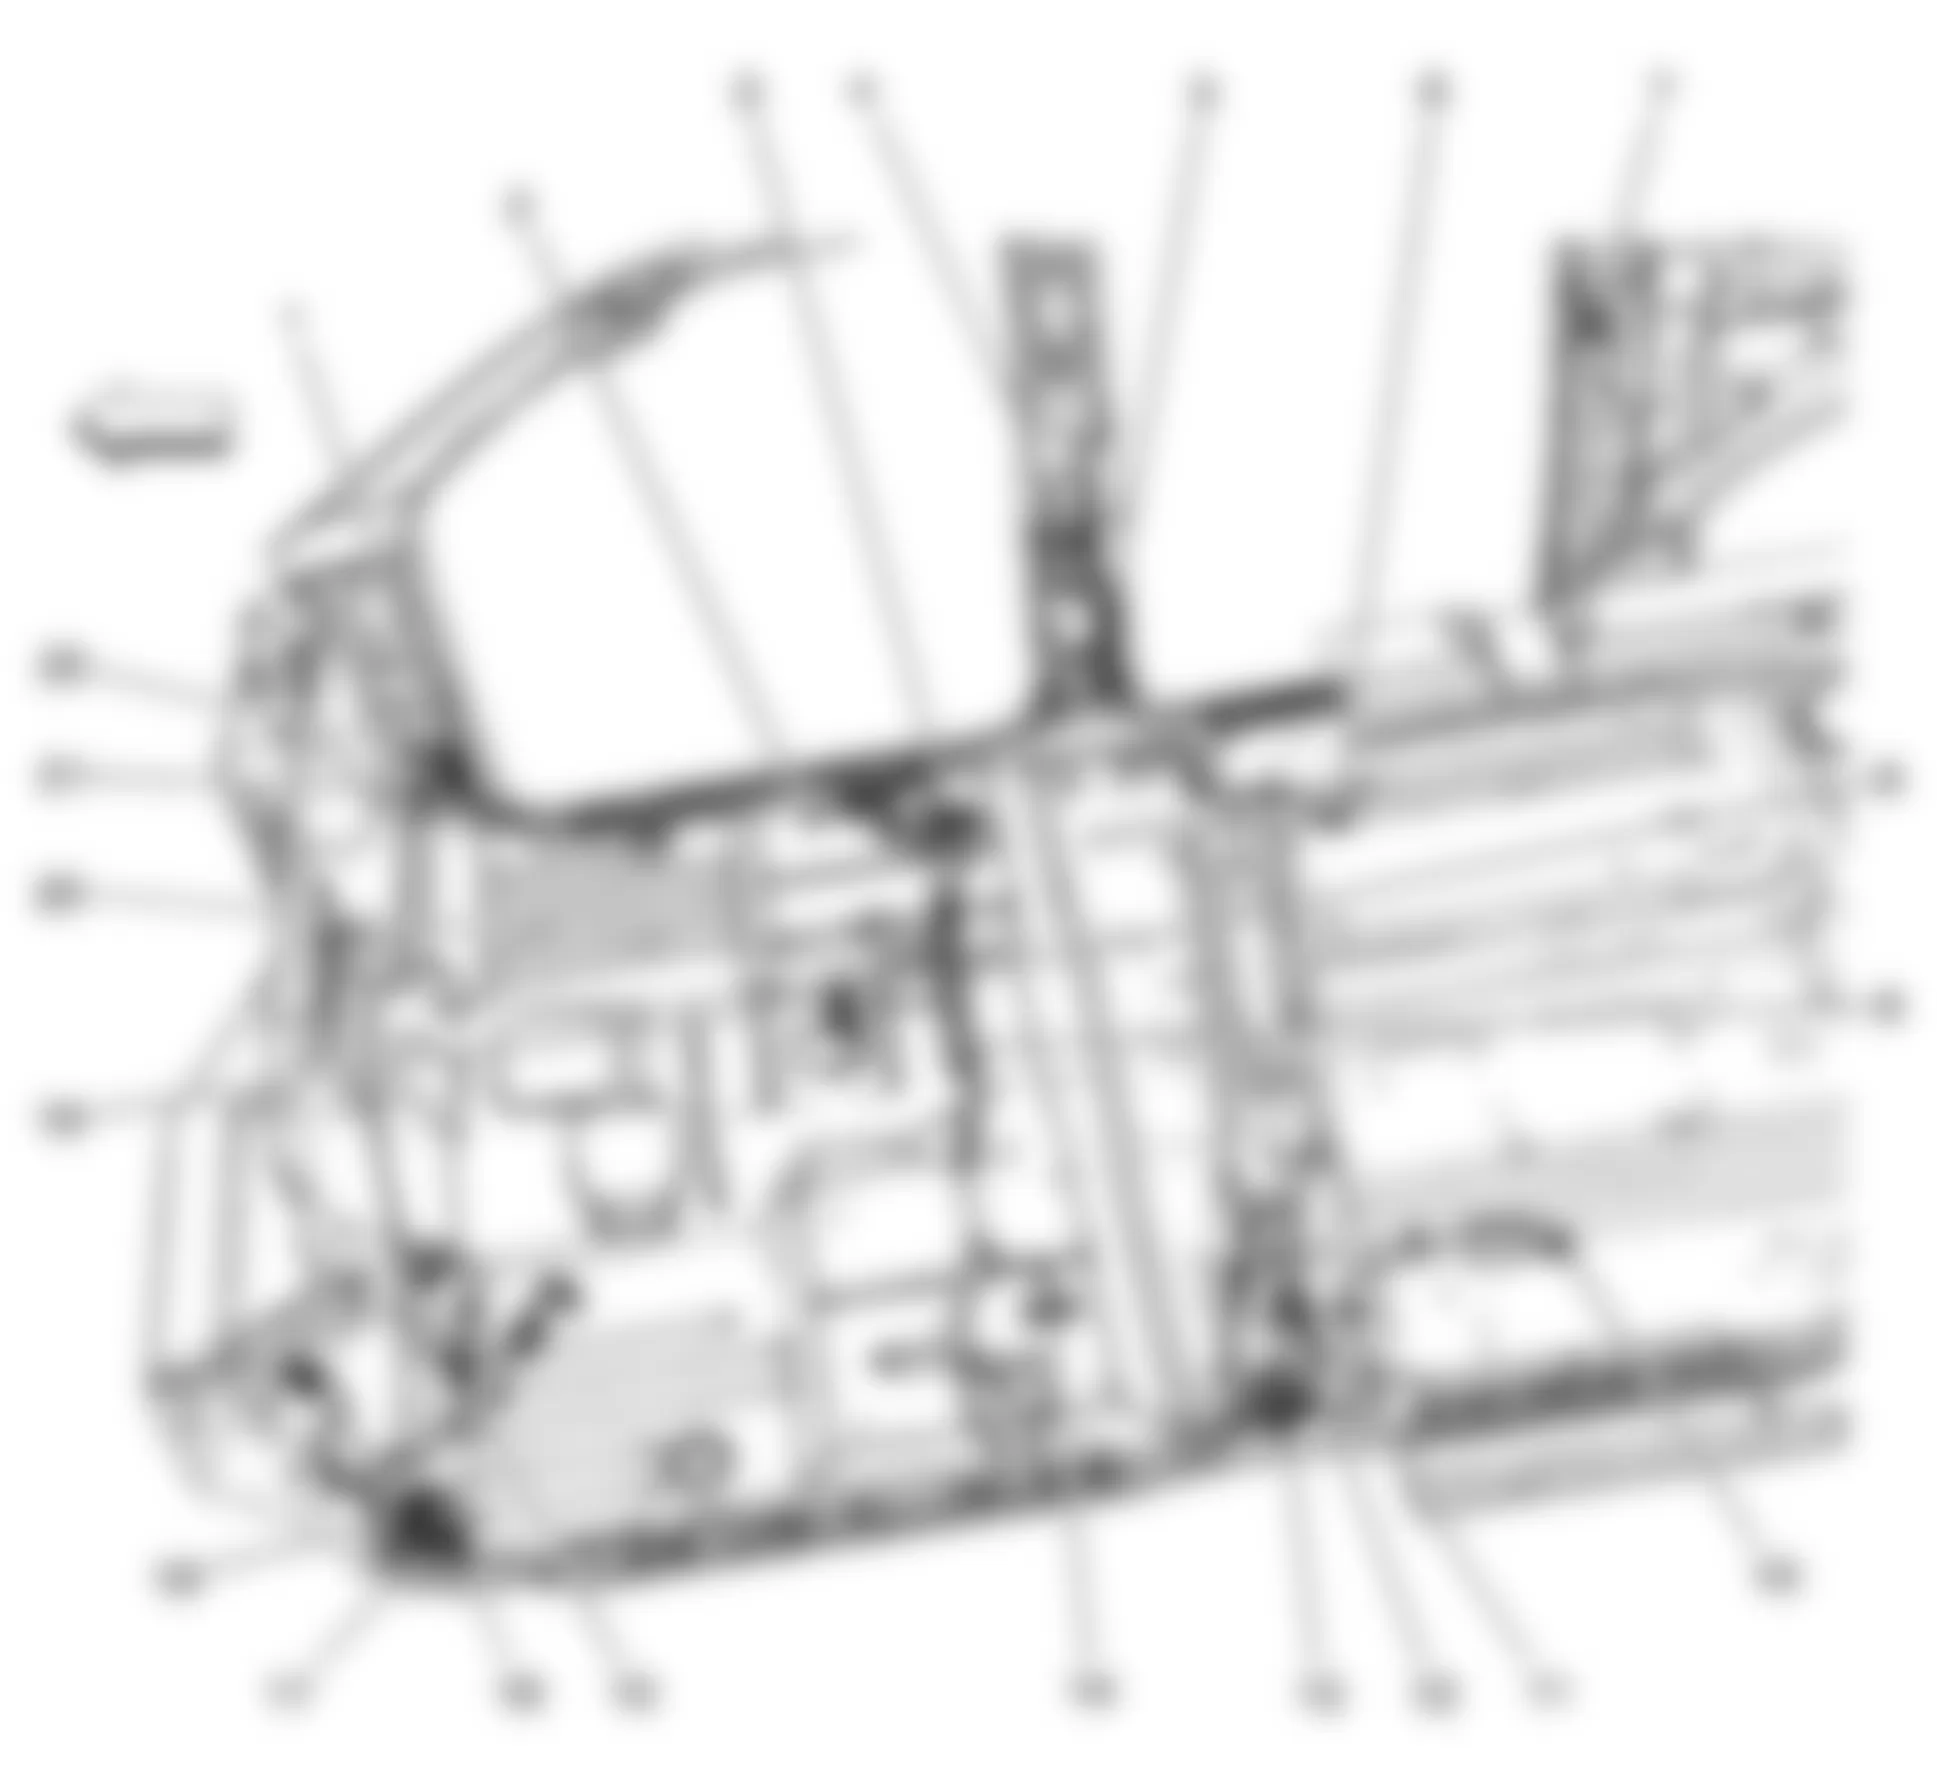 Chevrolet Avalanche 2008 - Component Locations -  Front Passenger Compartment (Long Wheel Base)